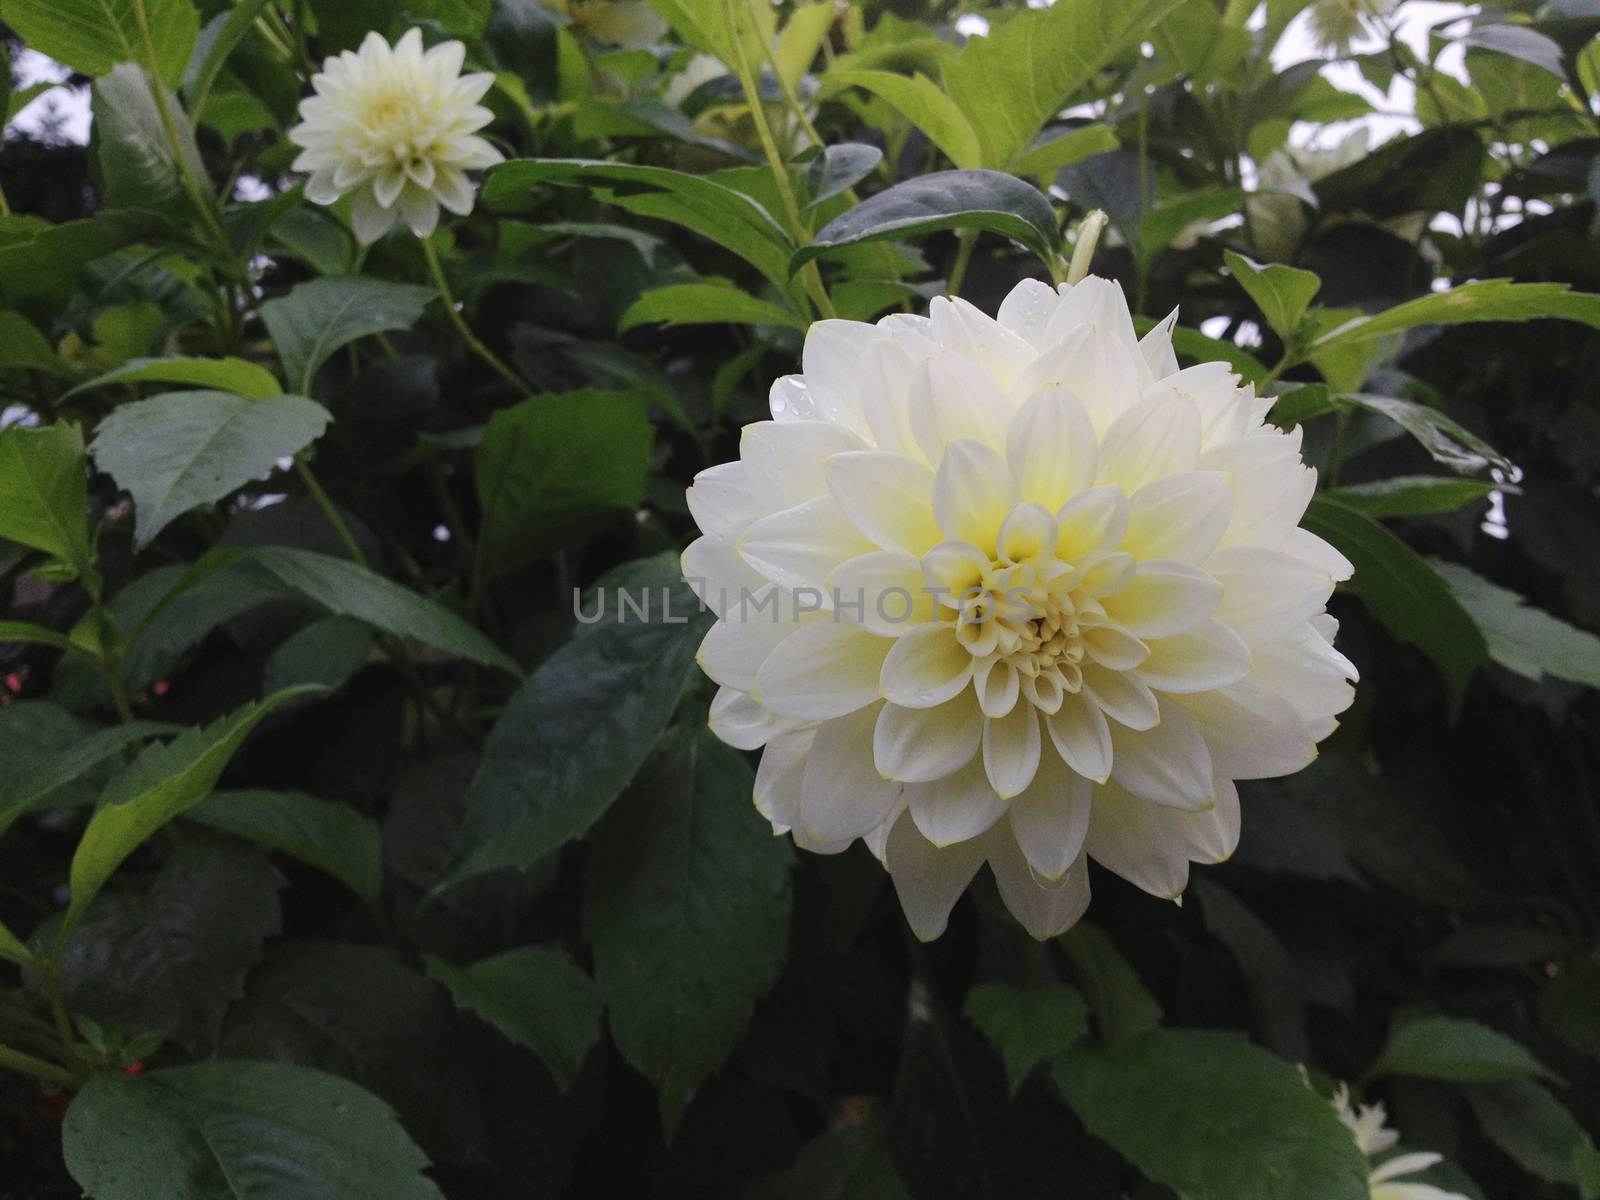 Perft white dahlias flowers in full bloom on the bush in nature